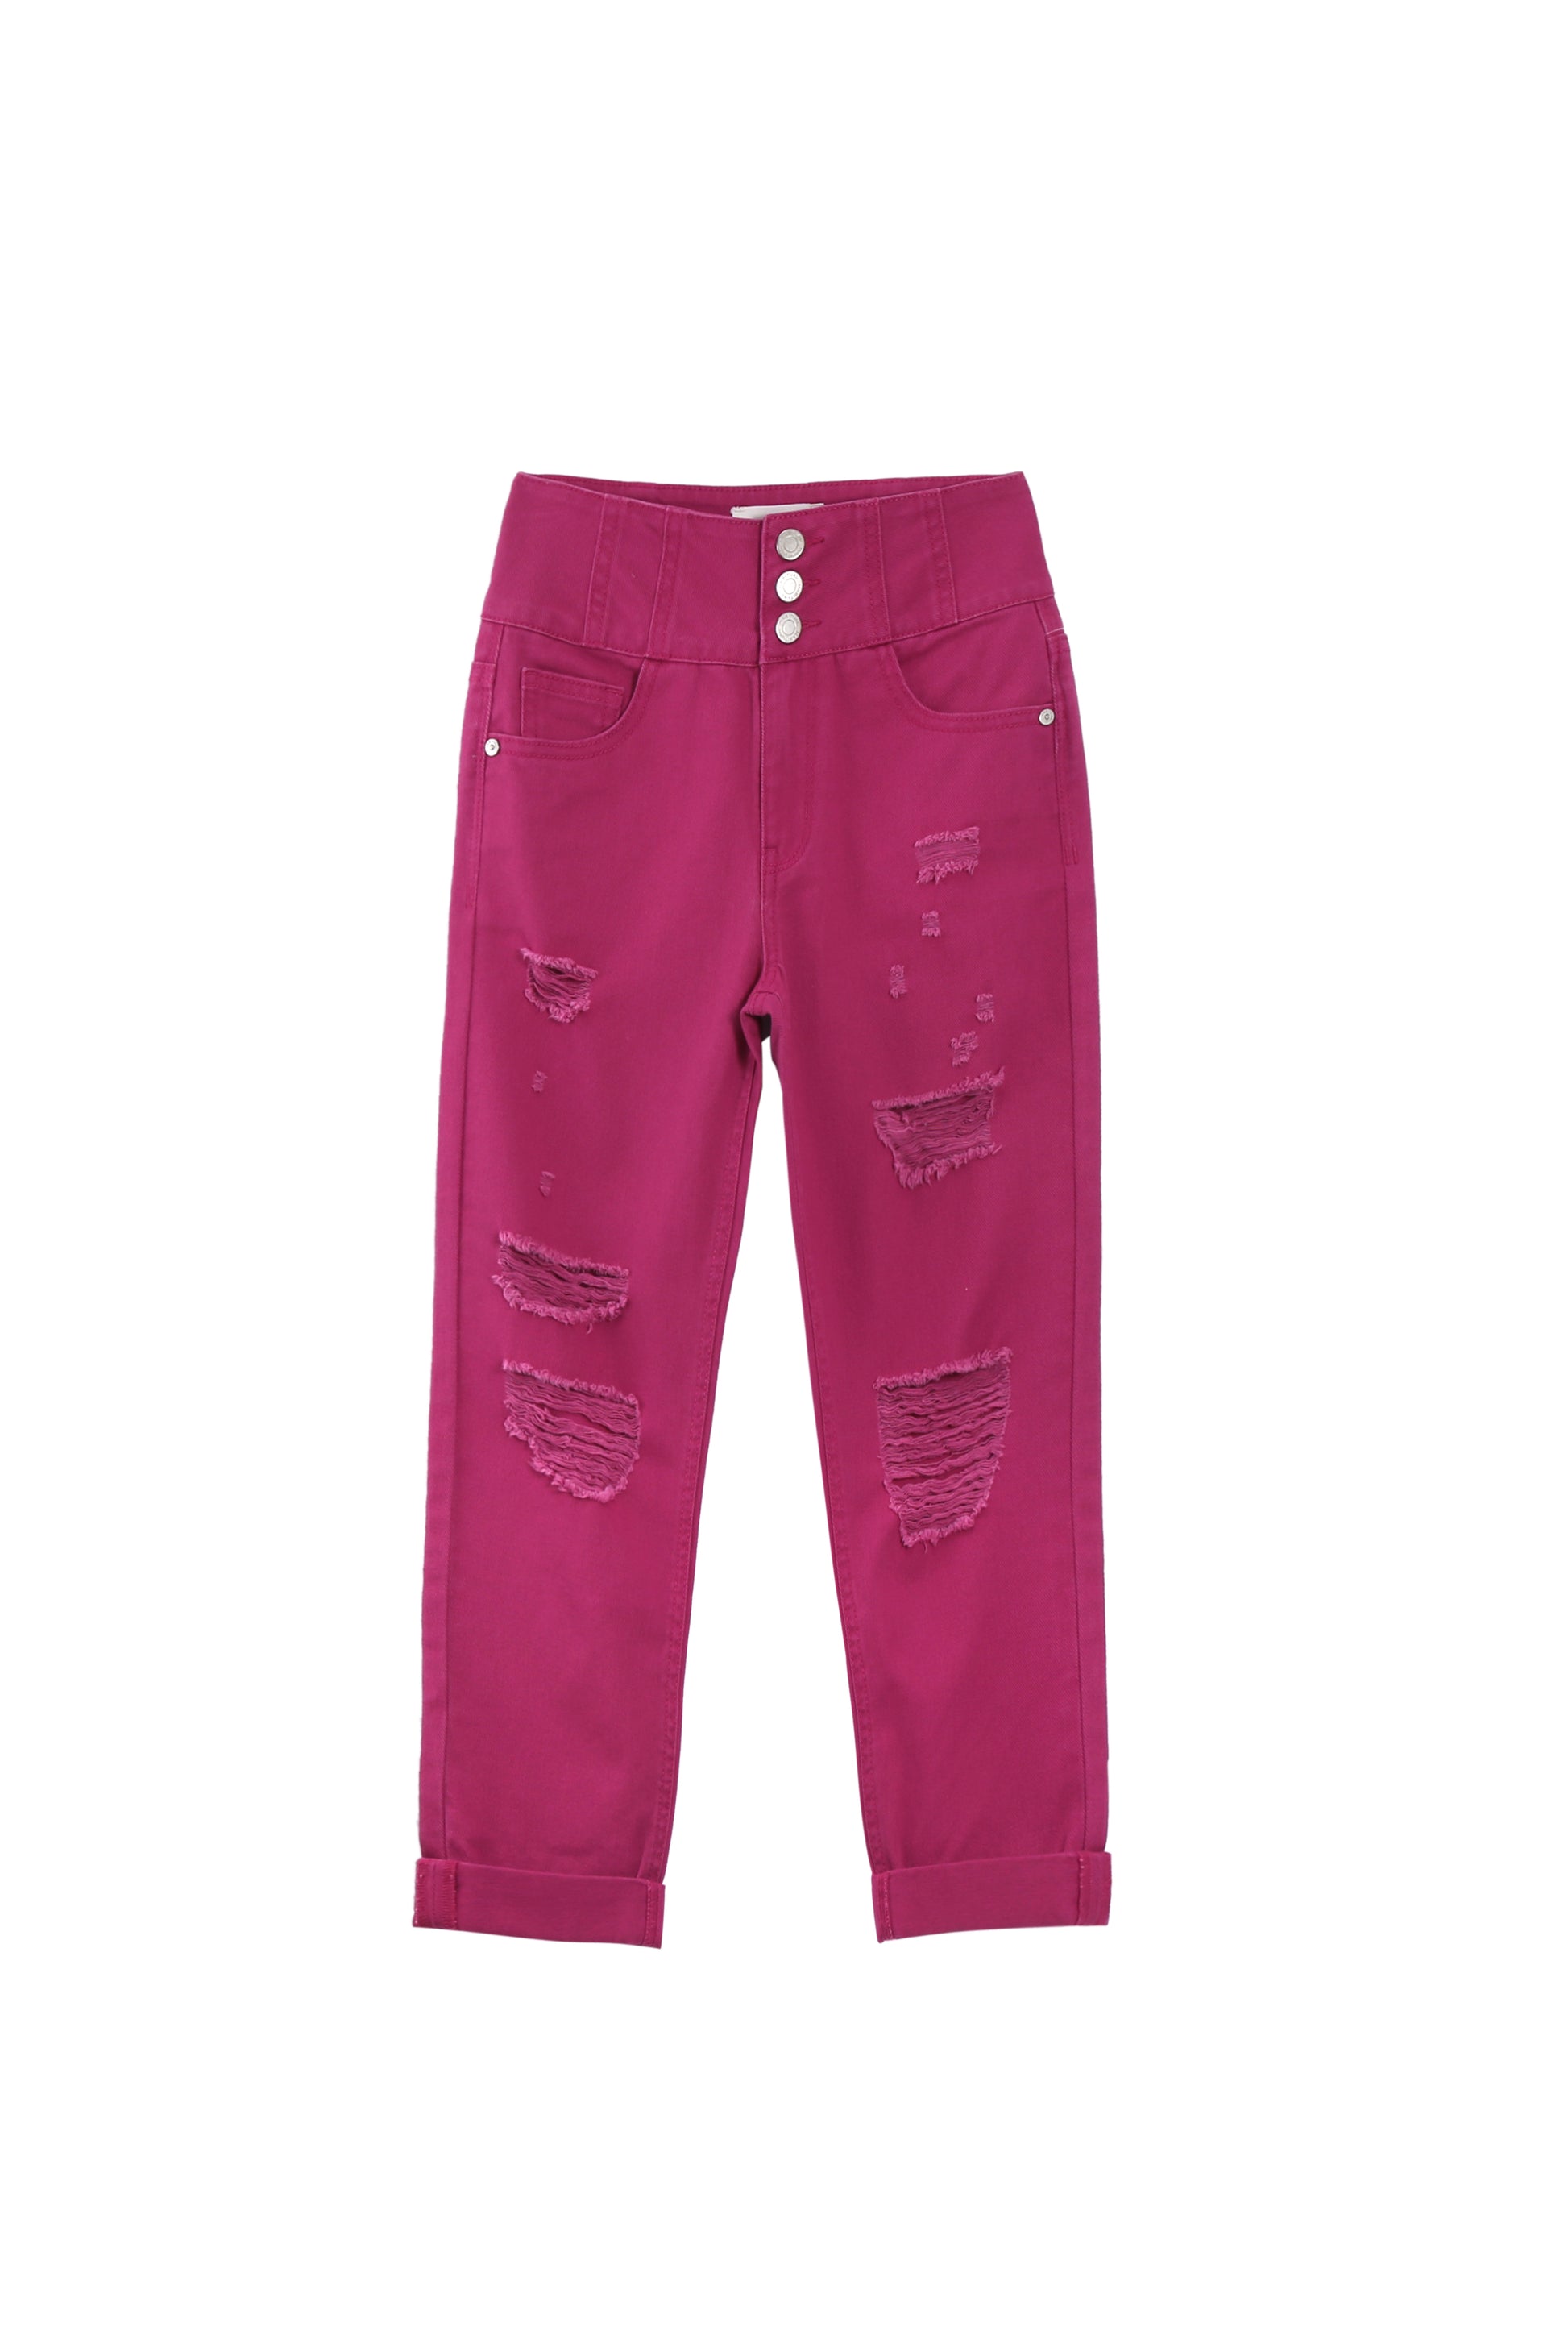 DEEP MAGENTA DISTRESSED CUFFED LEG HIGH RISE JEAN PANT WITH THREE BUTTON CLOSURE AND POCKETS